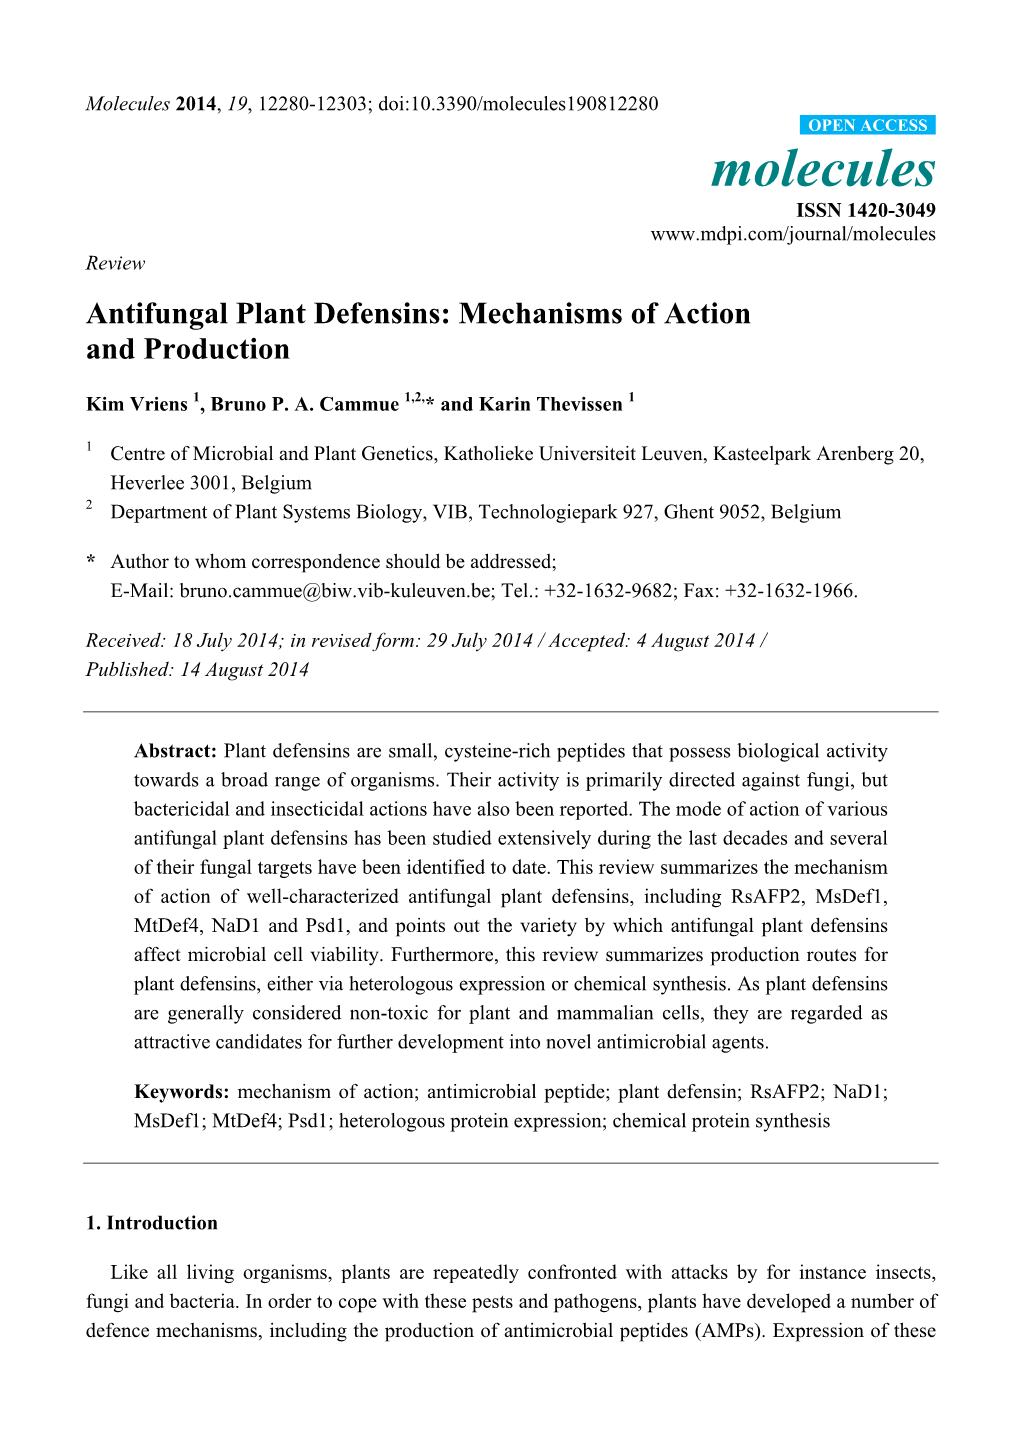 Antifungal Plant Defensins: Mechanisms of Action and Production